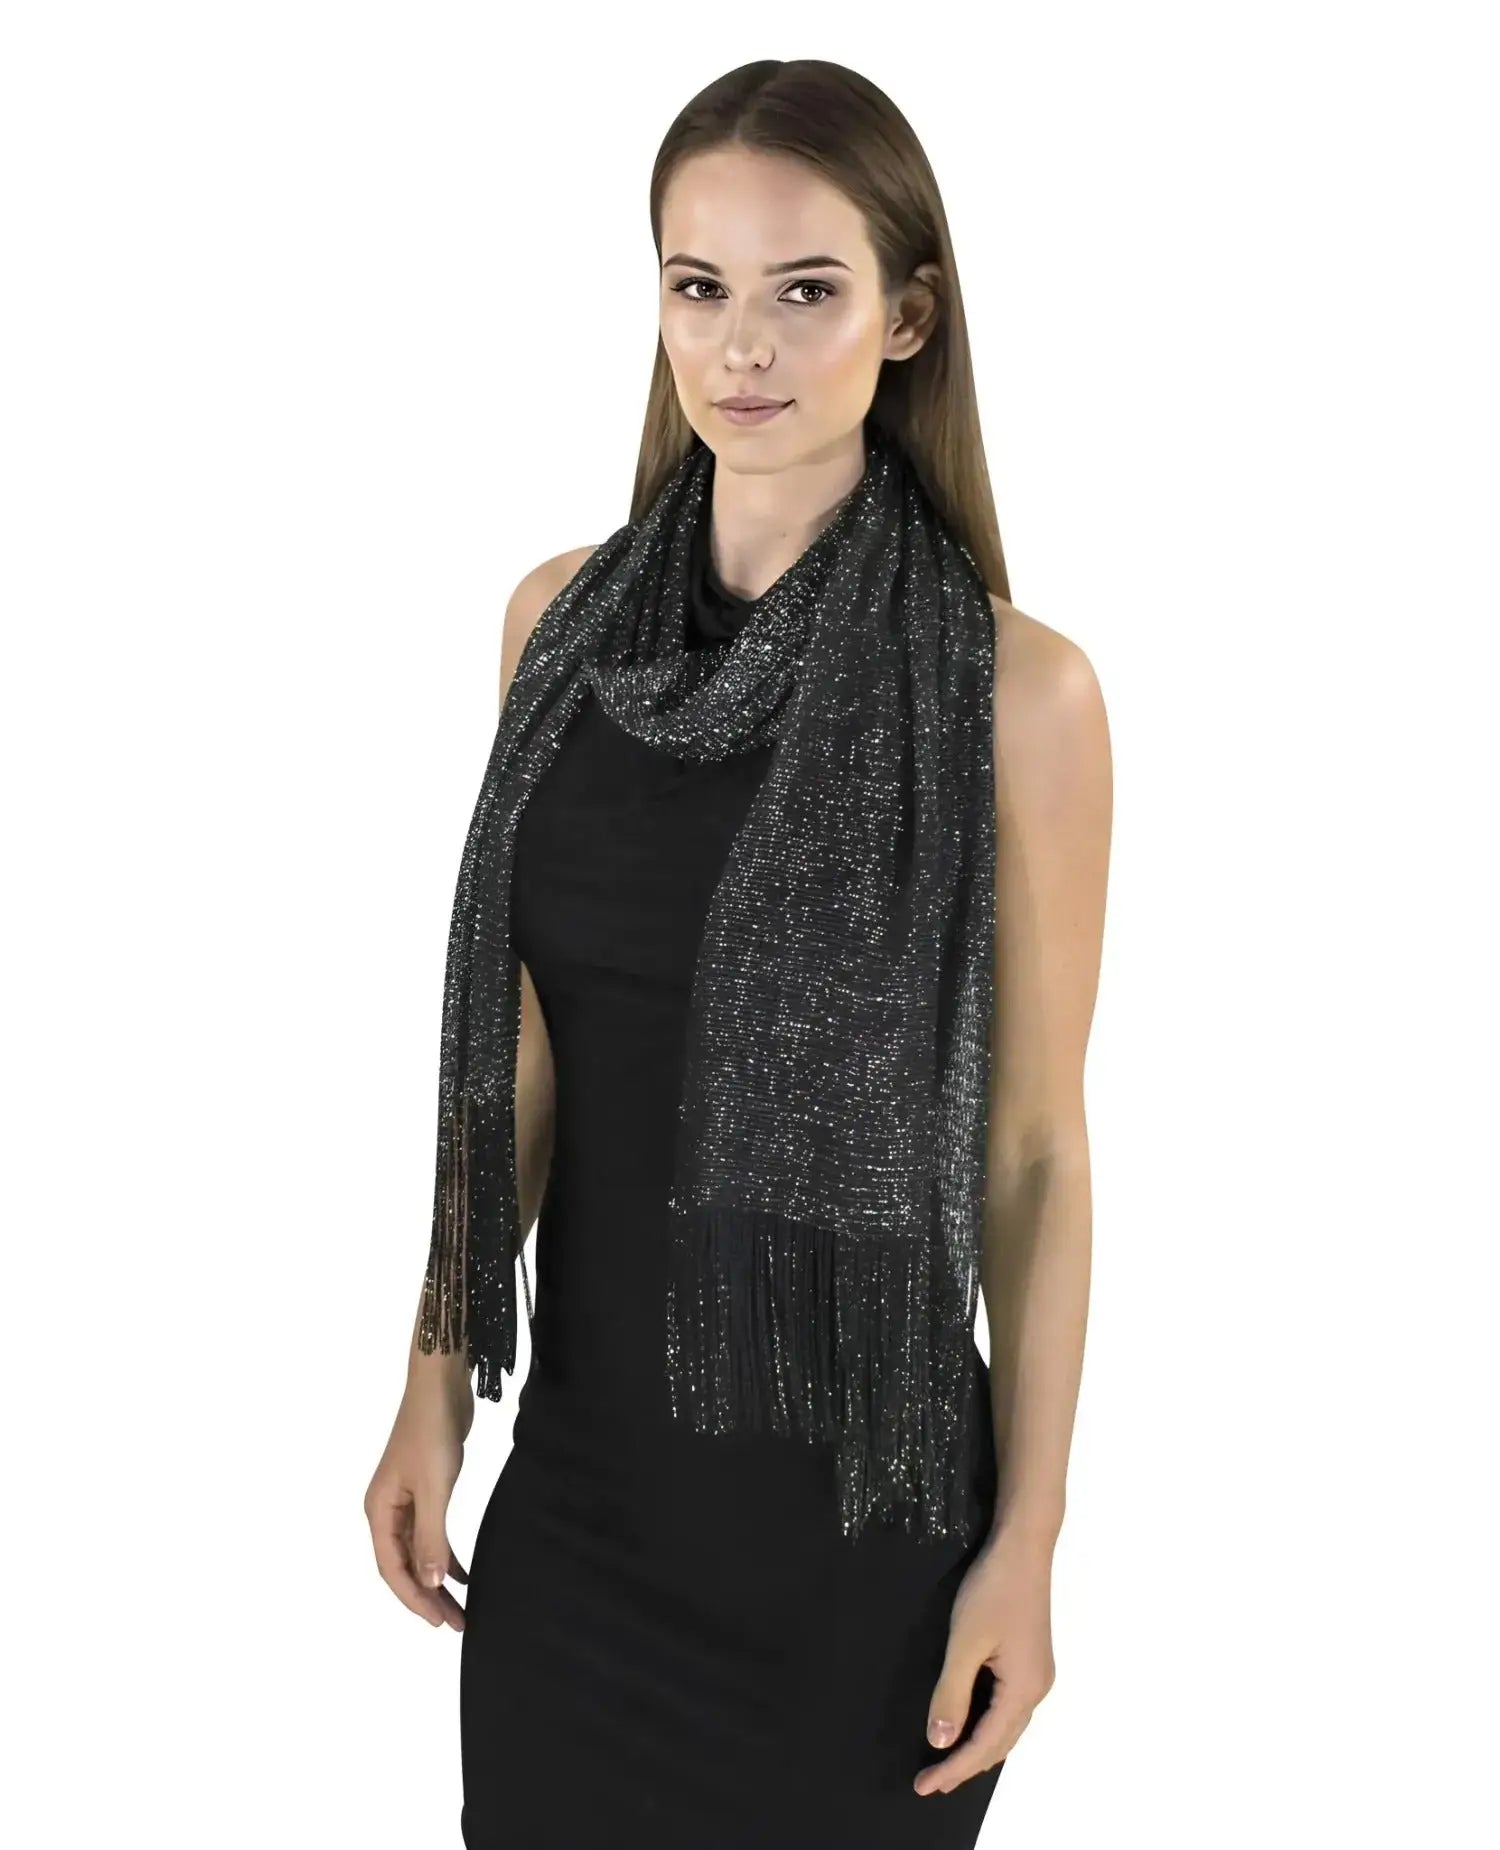 Woman wearing black dress and silver shimmering lurex scarf from Shimmering Lurex Scarf Fishnet Evening Shawl Scarves.